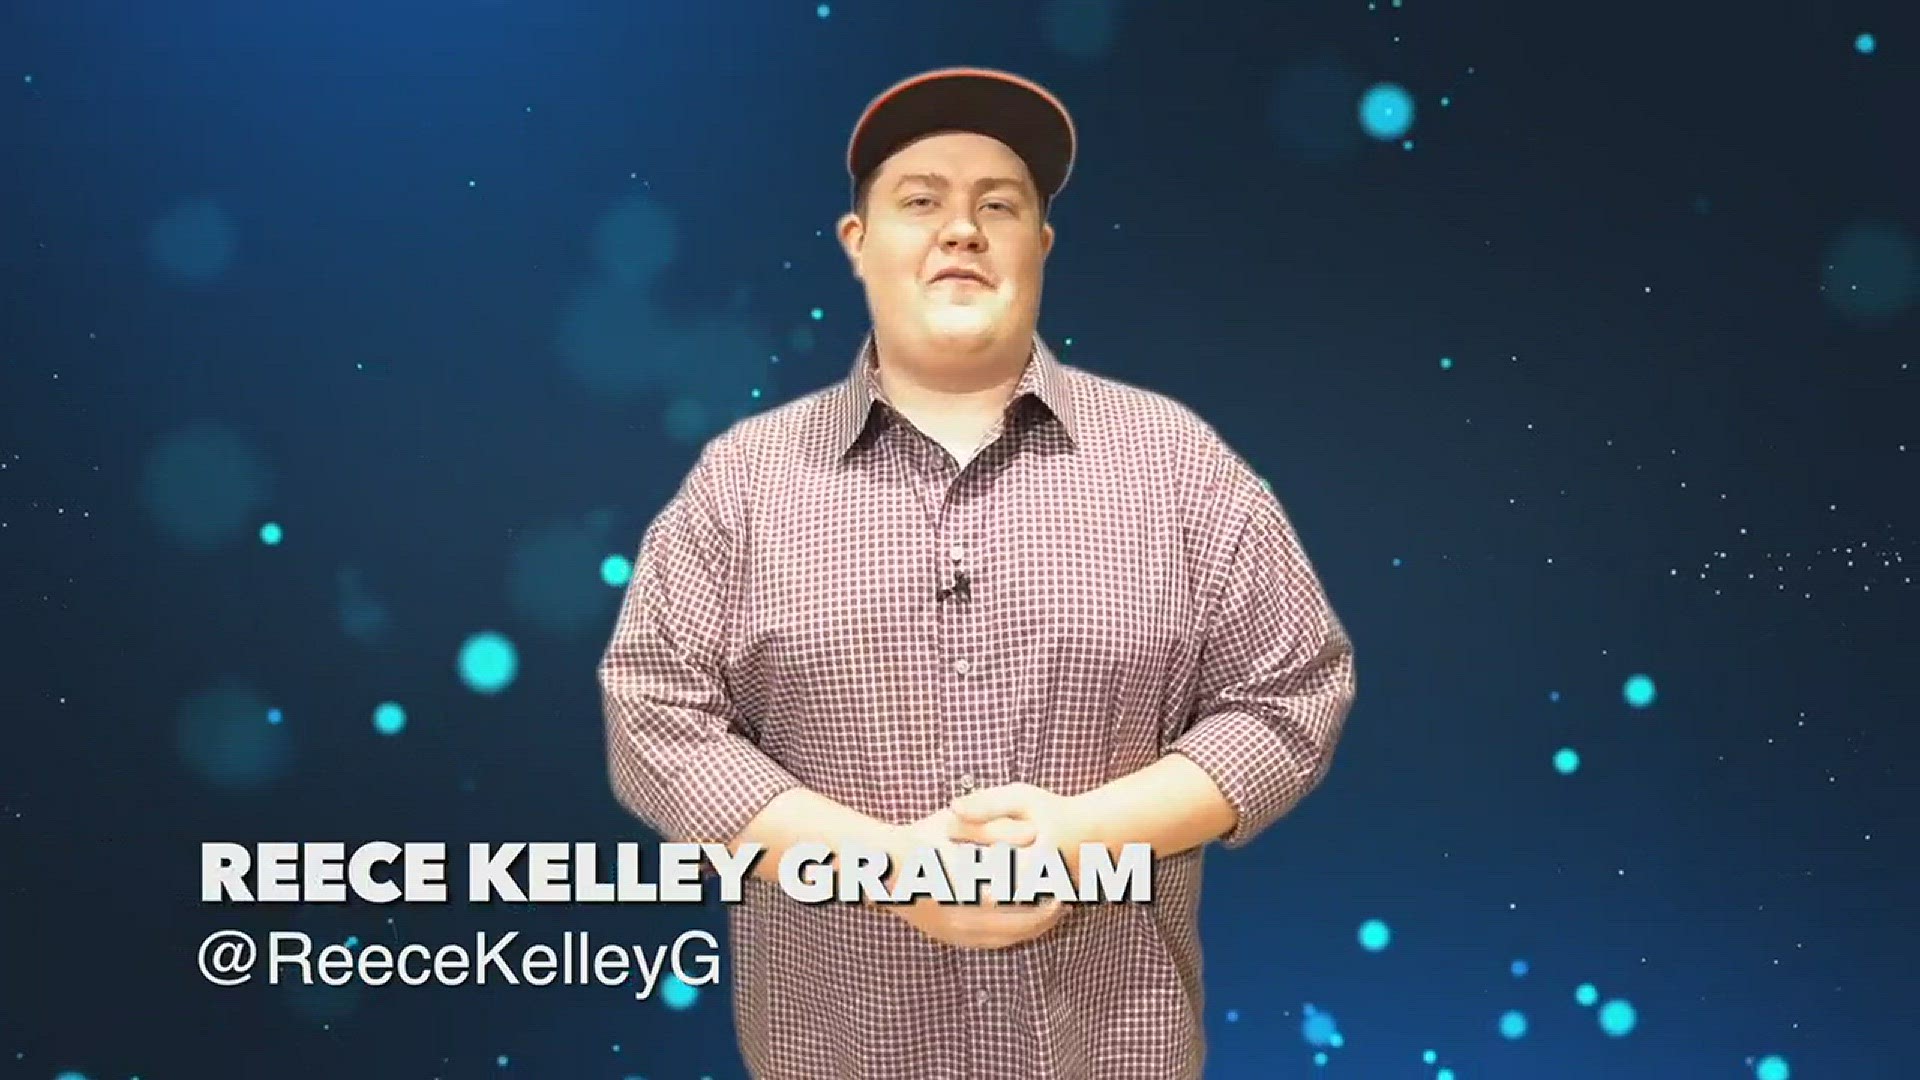 Reece Kelley Graham unveils the candidates for the top student sections in DFW. Vote for the best in our poll!